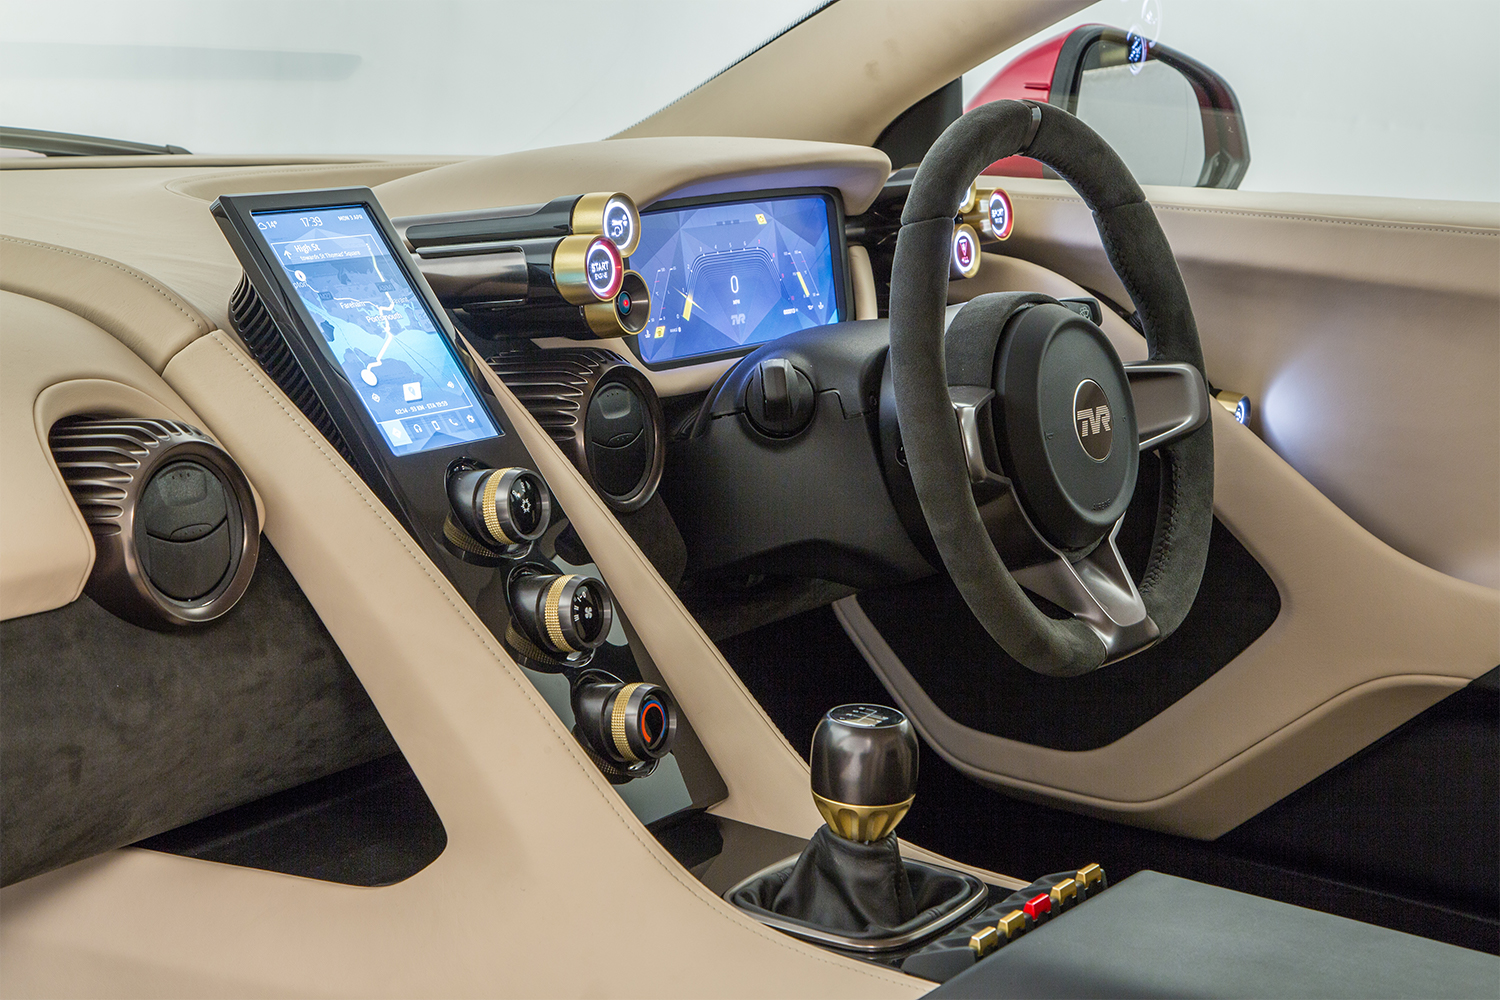 The interior and dashboard of the new TVR Griffith V8 sports car